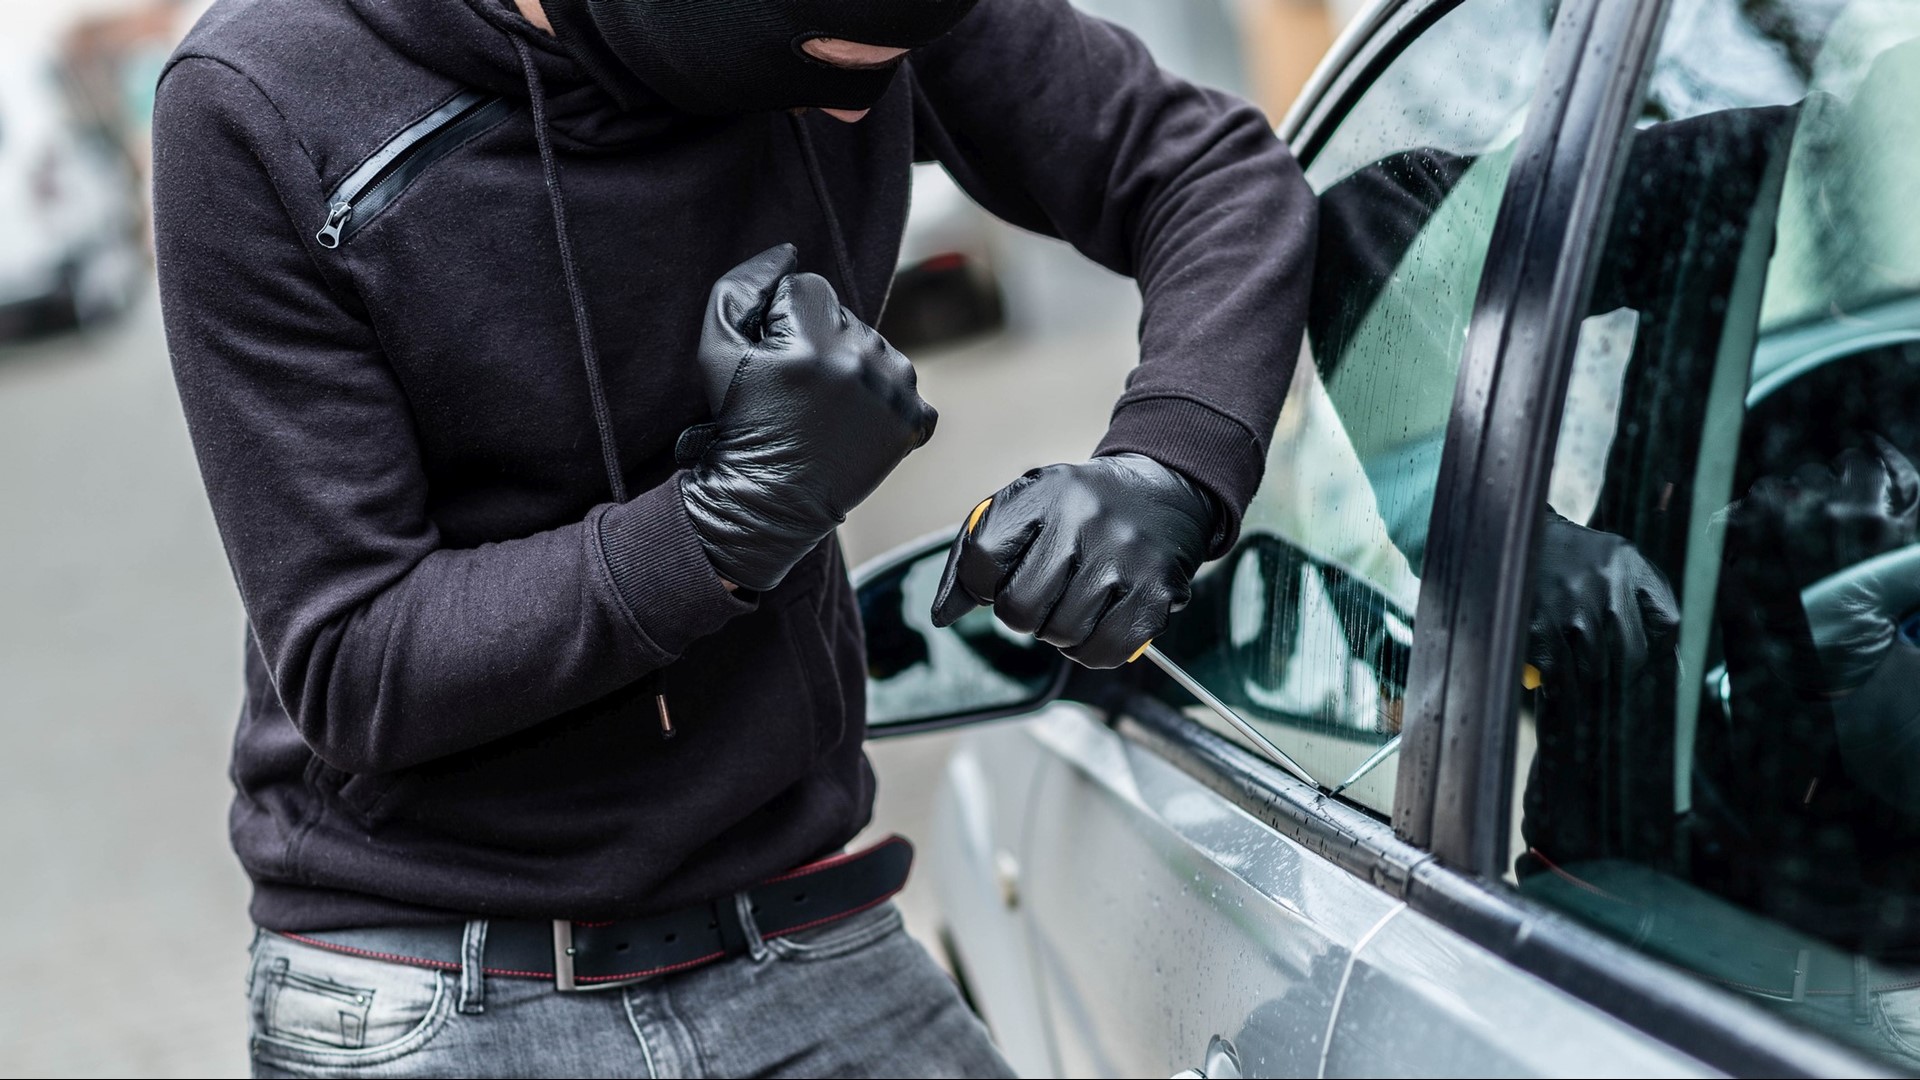 Thieves are targeting Kia and Hyundai cars across the country. Now, this trend is hitting the QC. Augustana College has recently reported five thefts on campus.